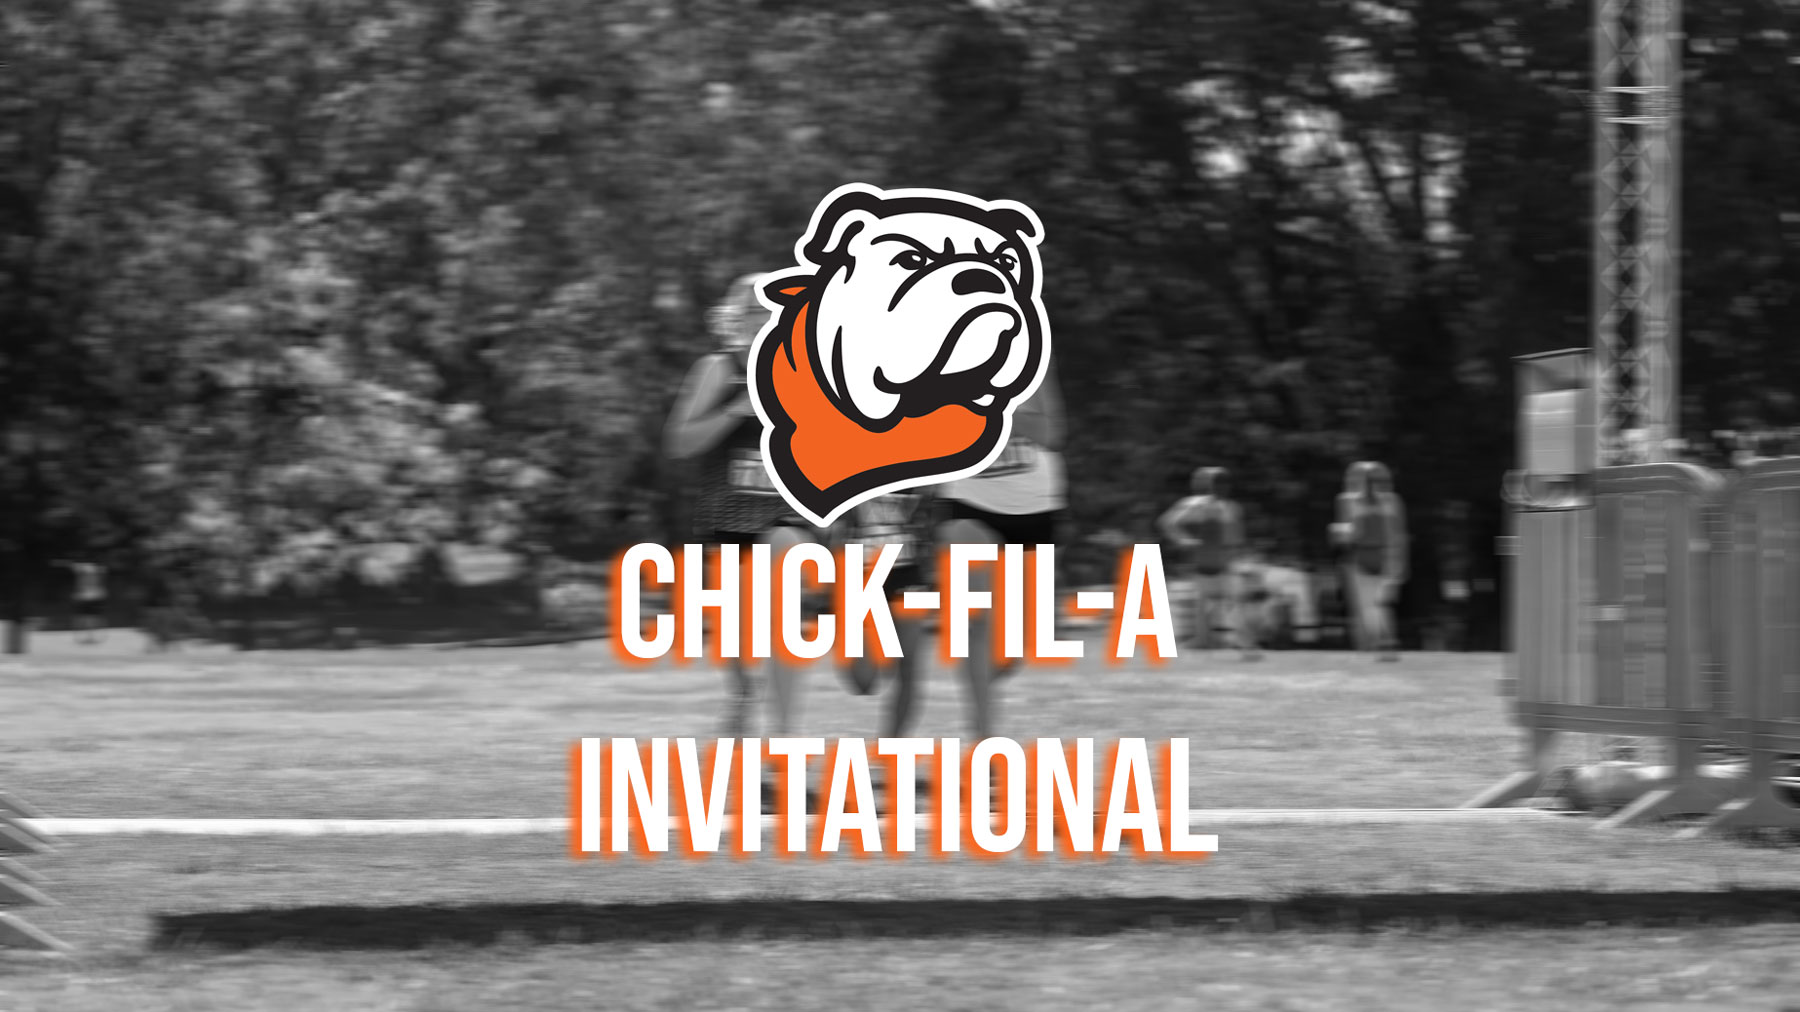 Cross Country Races at Chick-fil-A Invitational